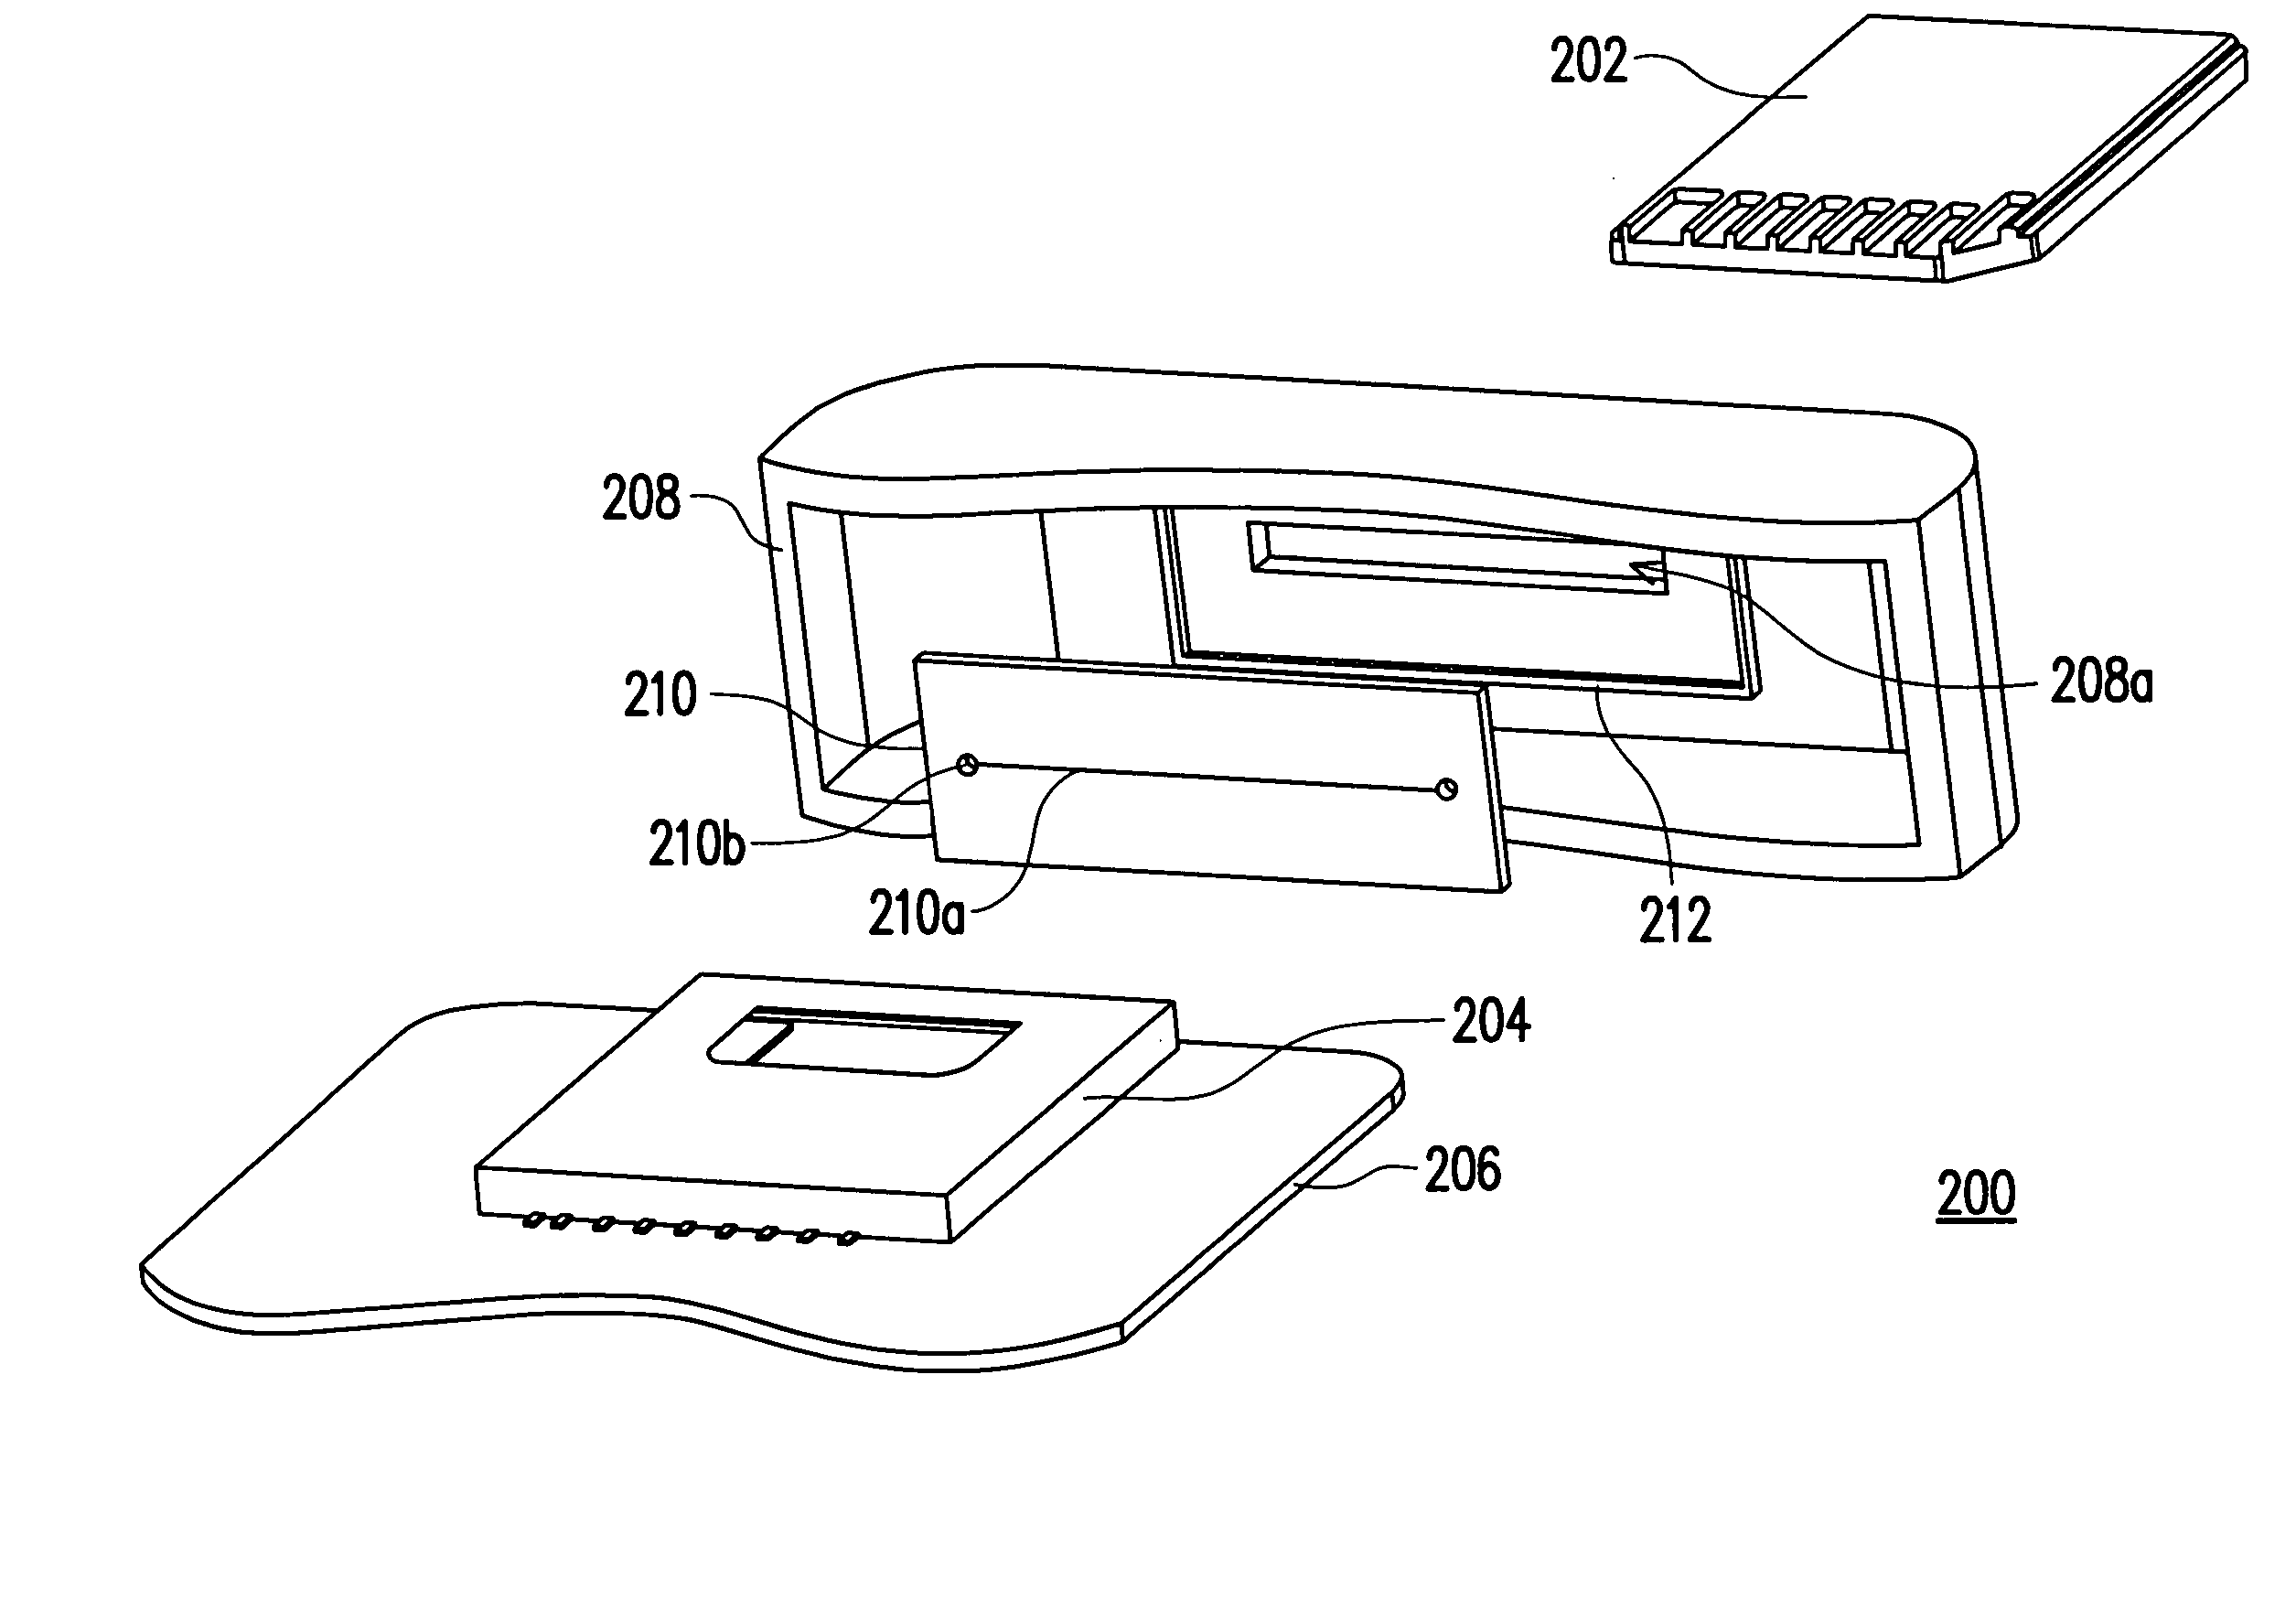 Dust-proof structure for card connector in handheld electronic device